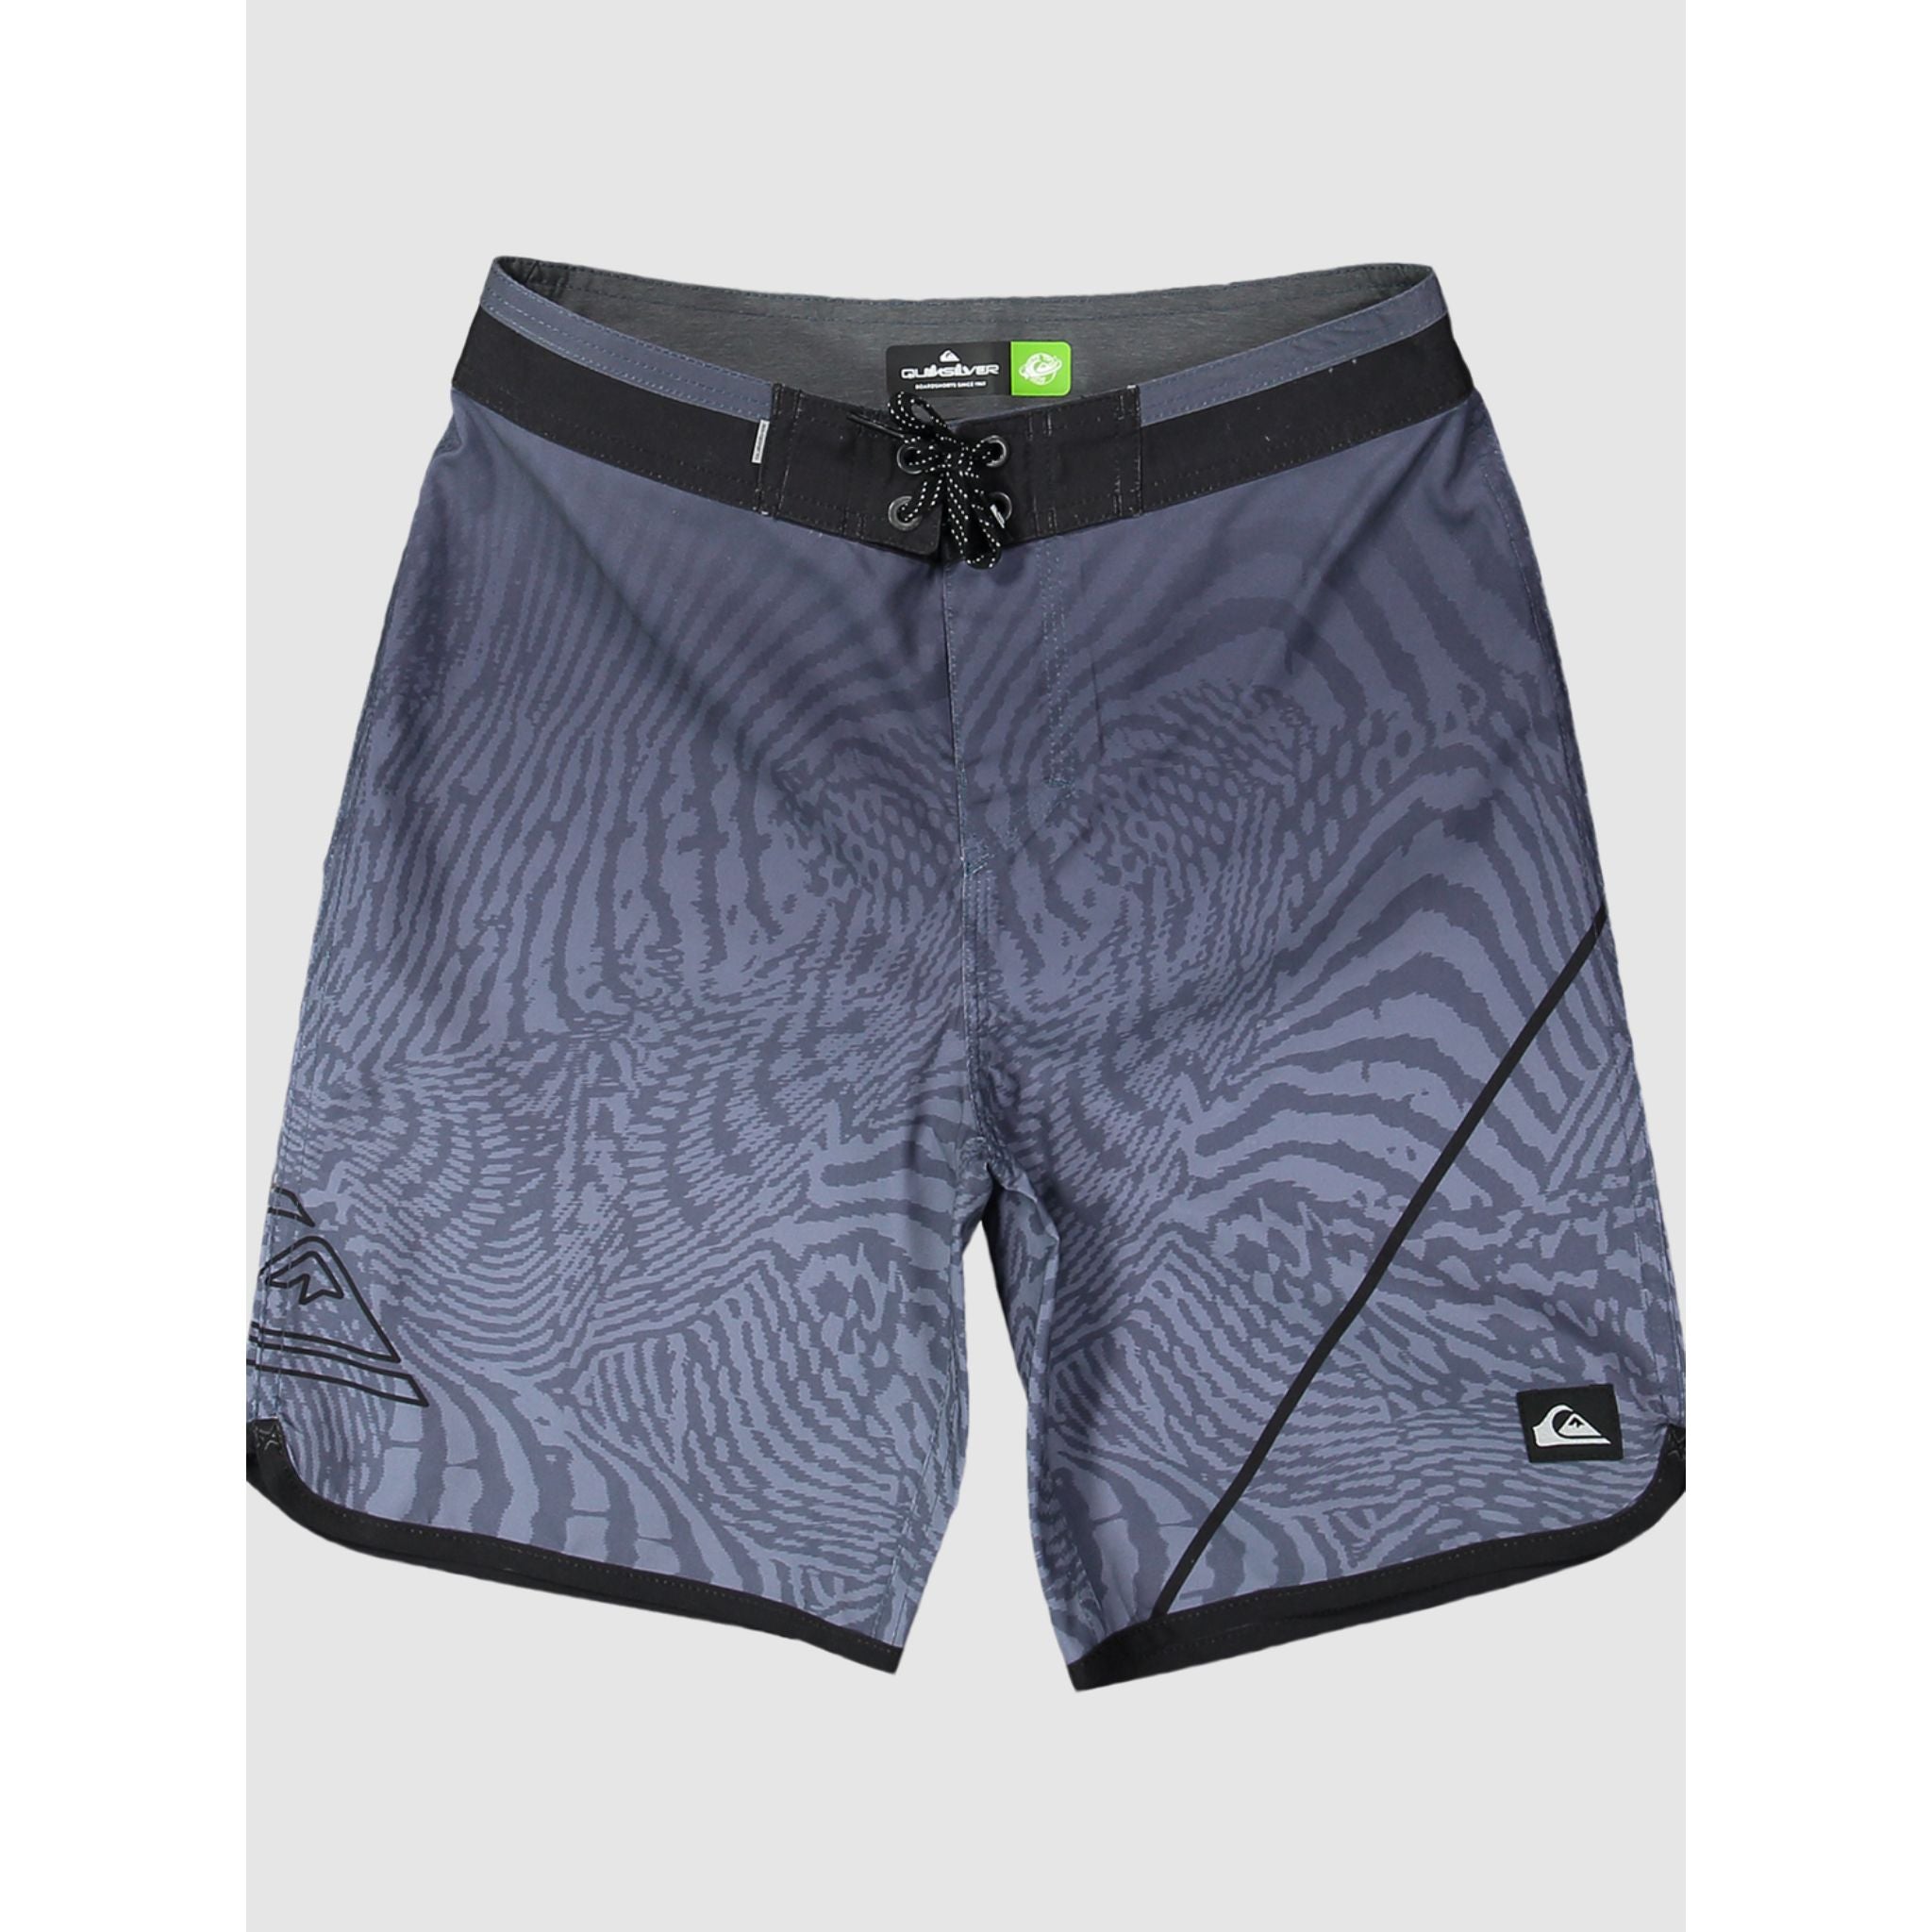 Quiksilver Everyday New Wave Youth Boardshort